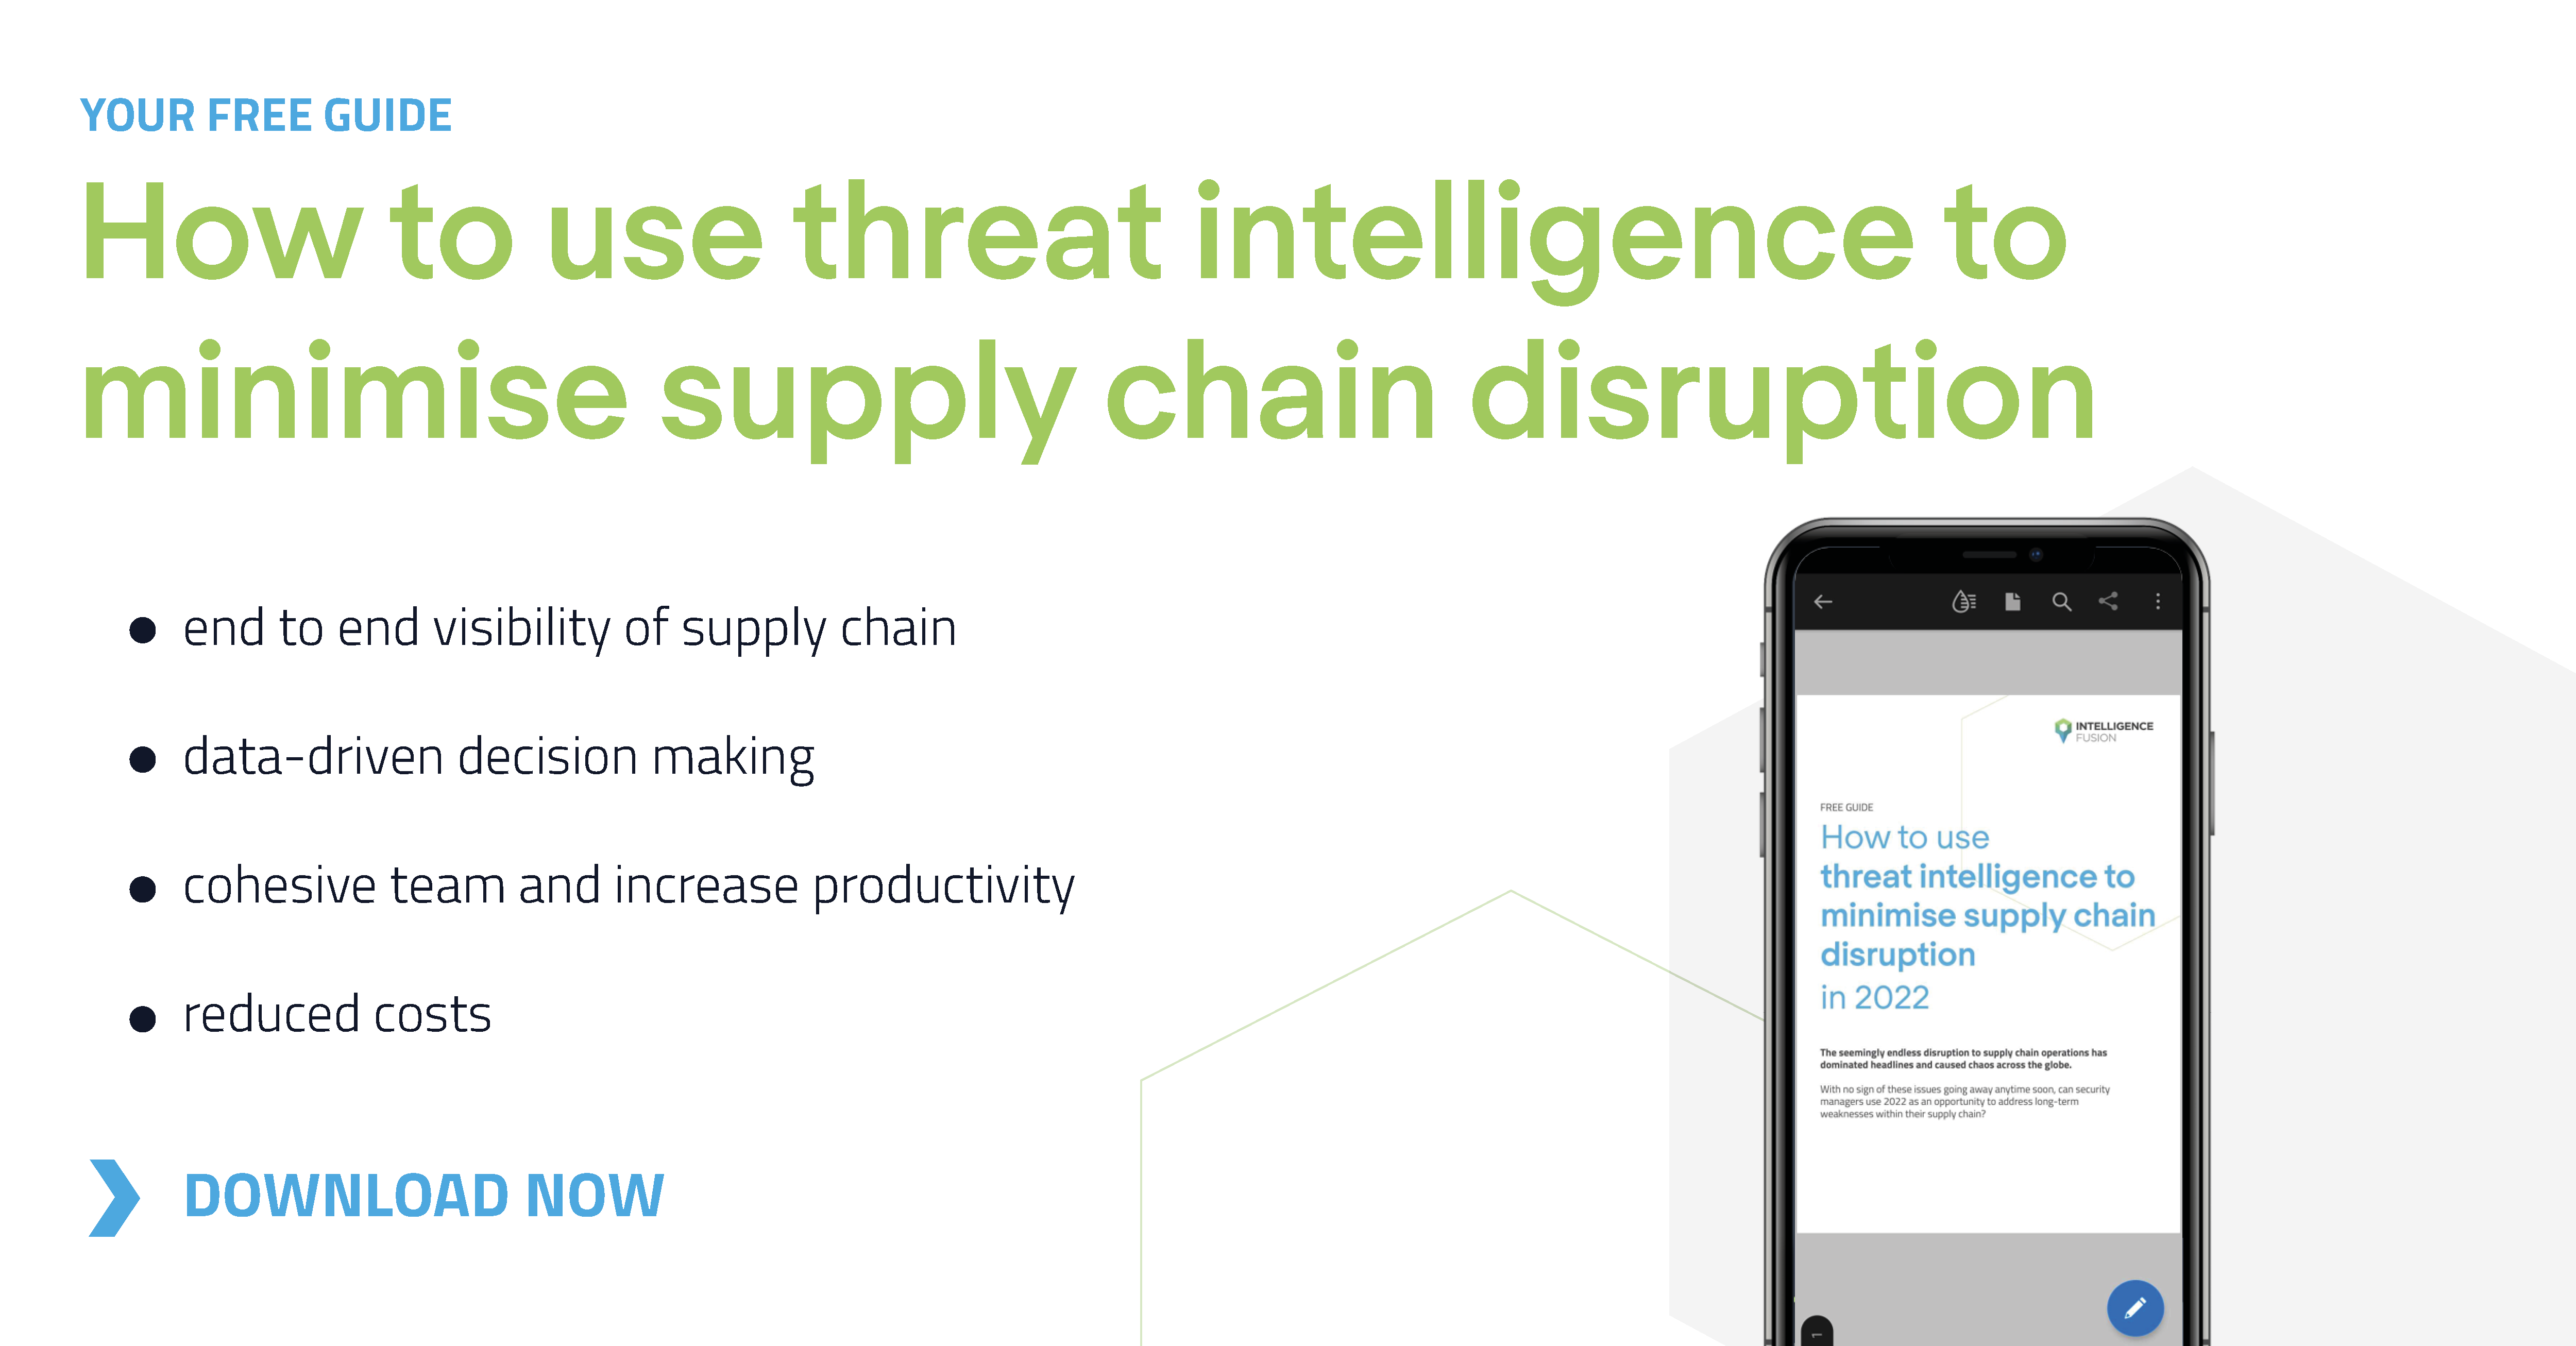 How utilising threat intelligence can help security managers minimise supply chain disruption in 2022